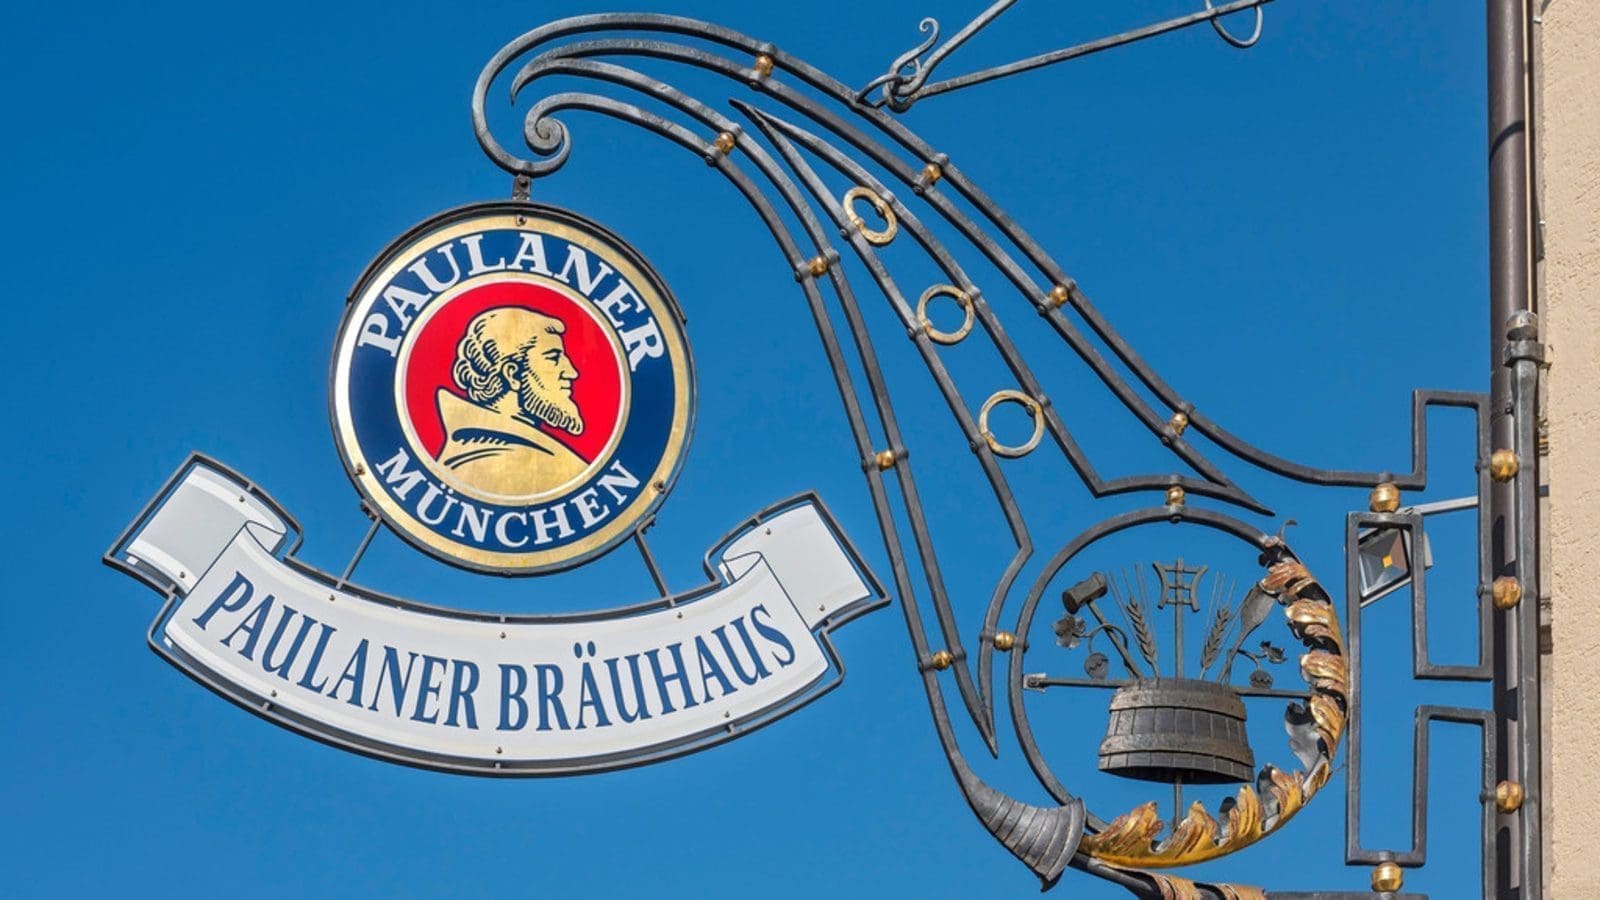 Paulaner Brauerei CEO to step down in six months over ‘difference of opinions’